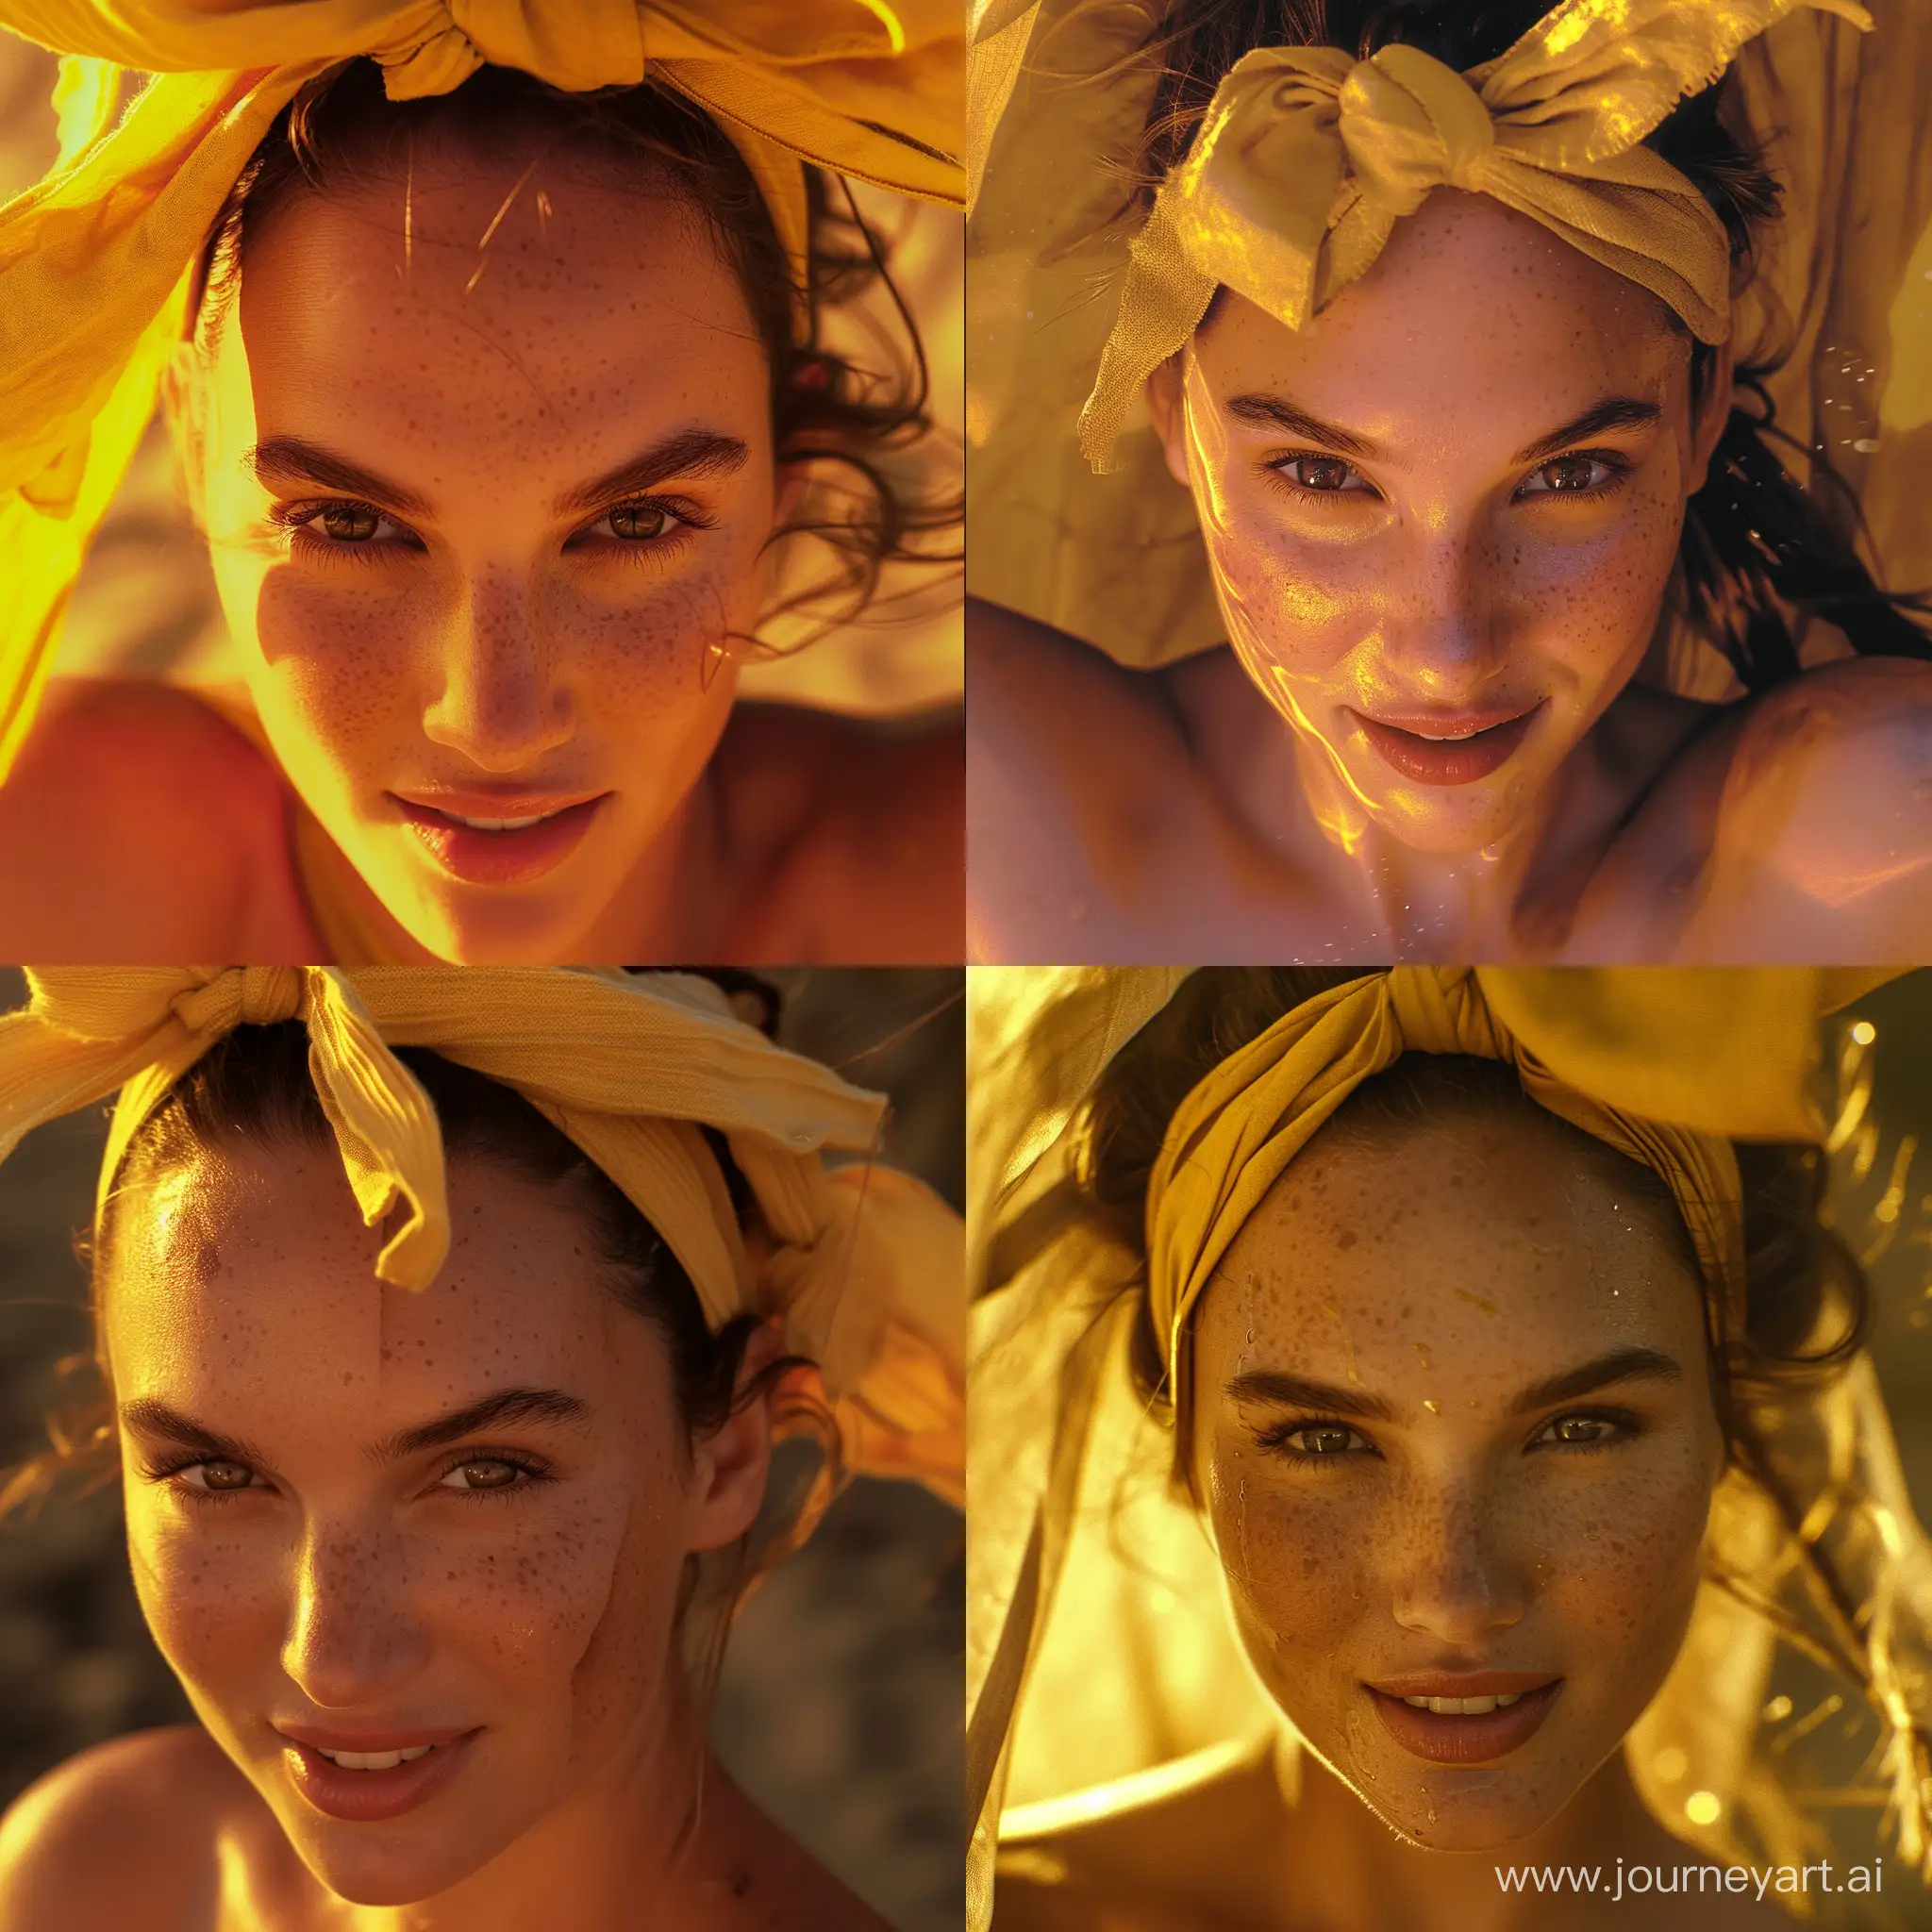 Gal-Gadot-Radiates-Warmth-and-Joy-with-TiedUp-Hair-and-Freckled-Cheerful-Expression